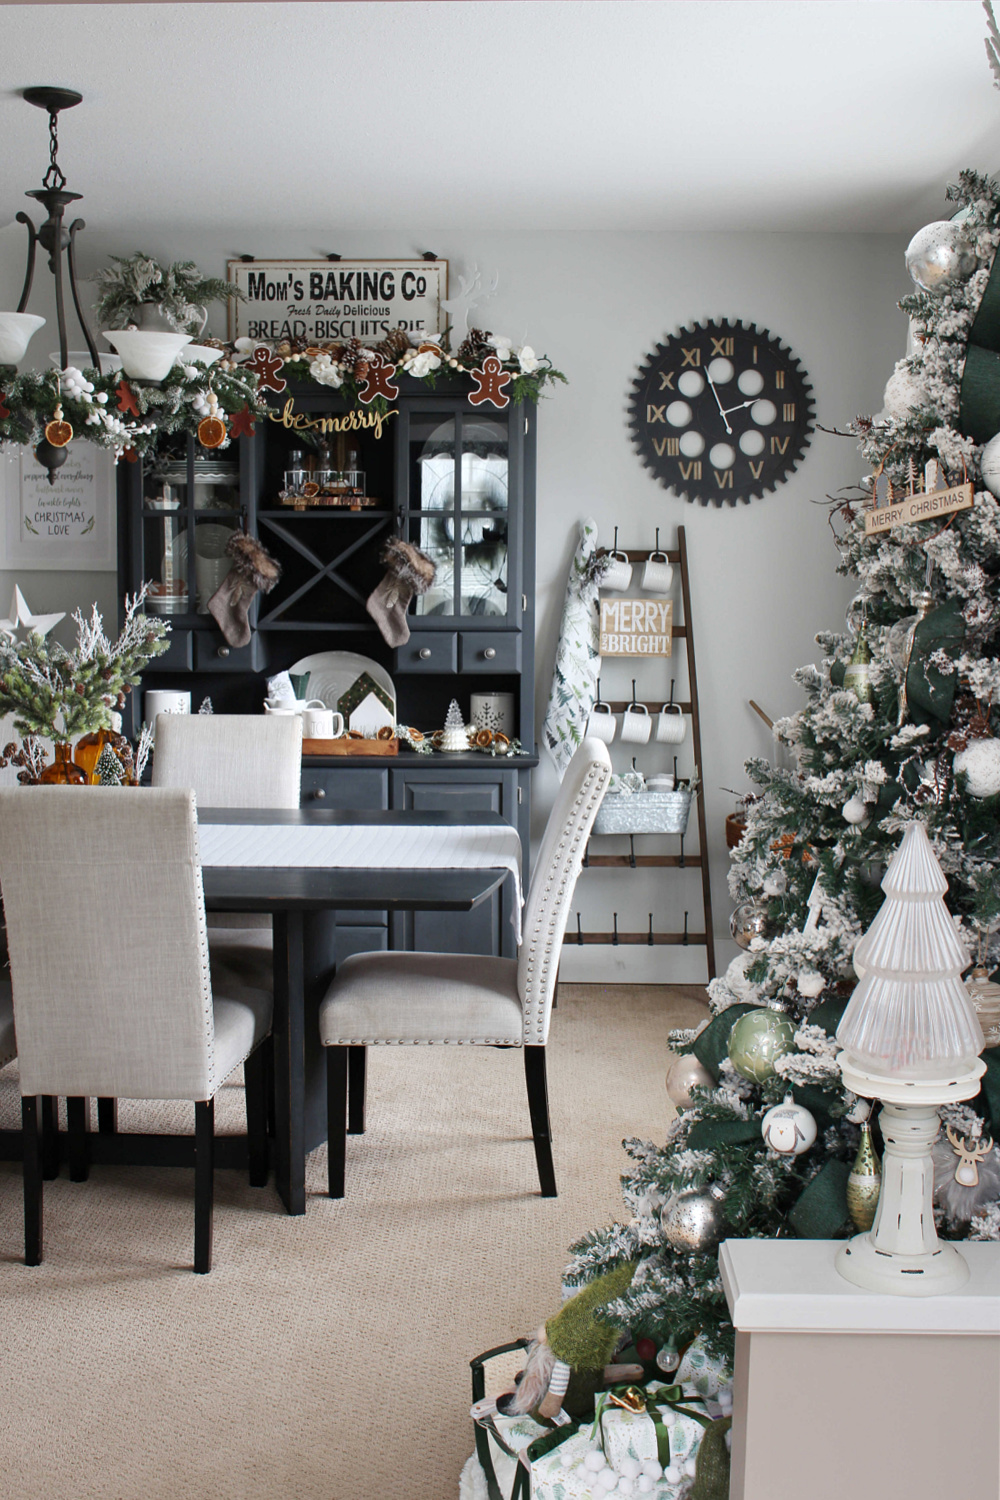 Beautiful dining room decorated for Christmas in green and white.